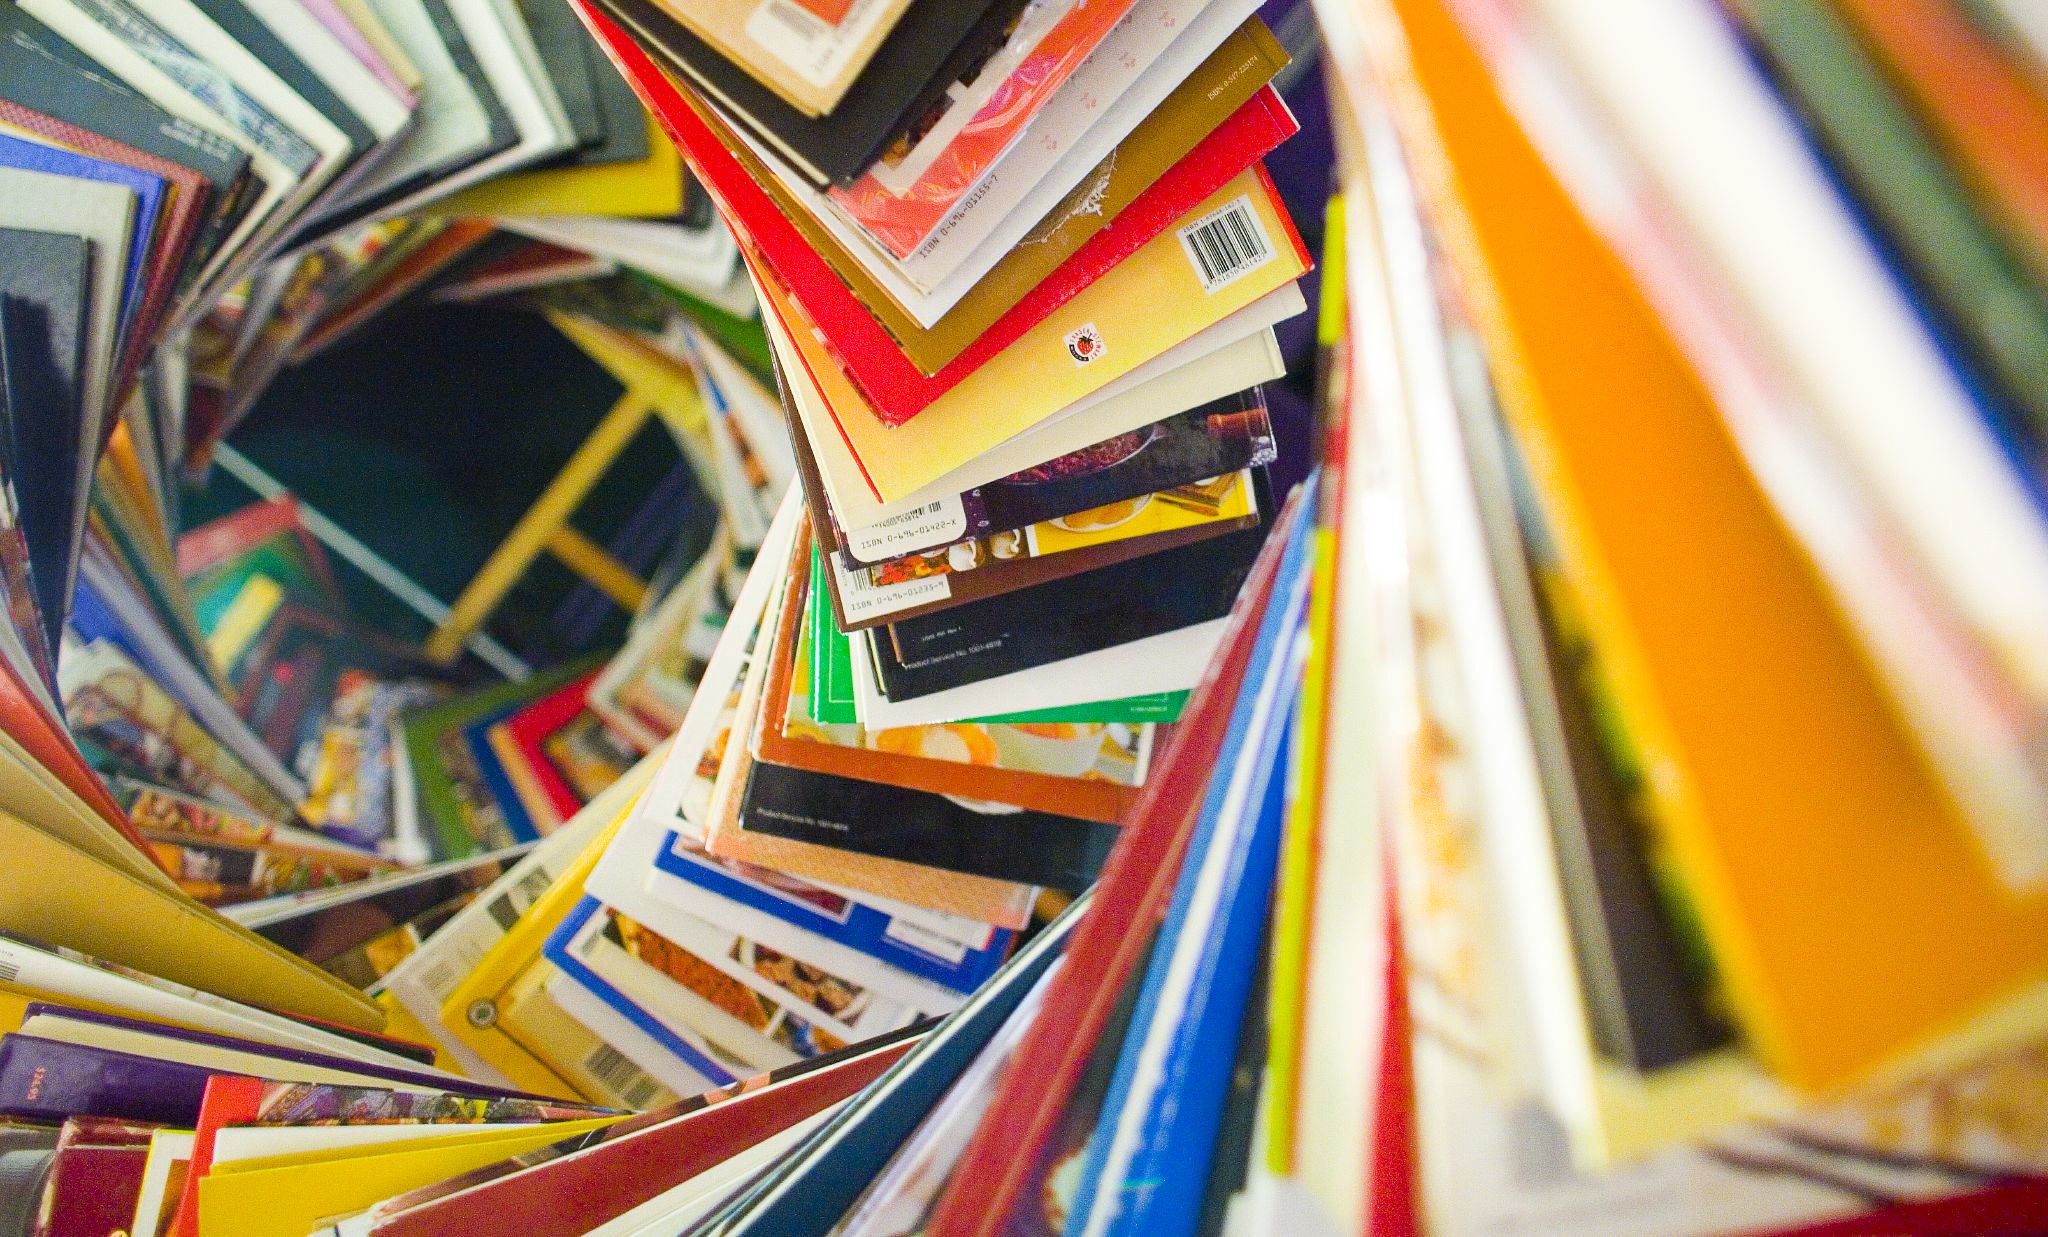 Library books stacked in a helix and photographed from the top